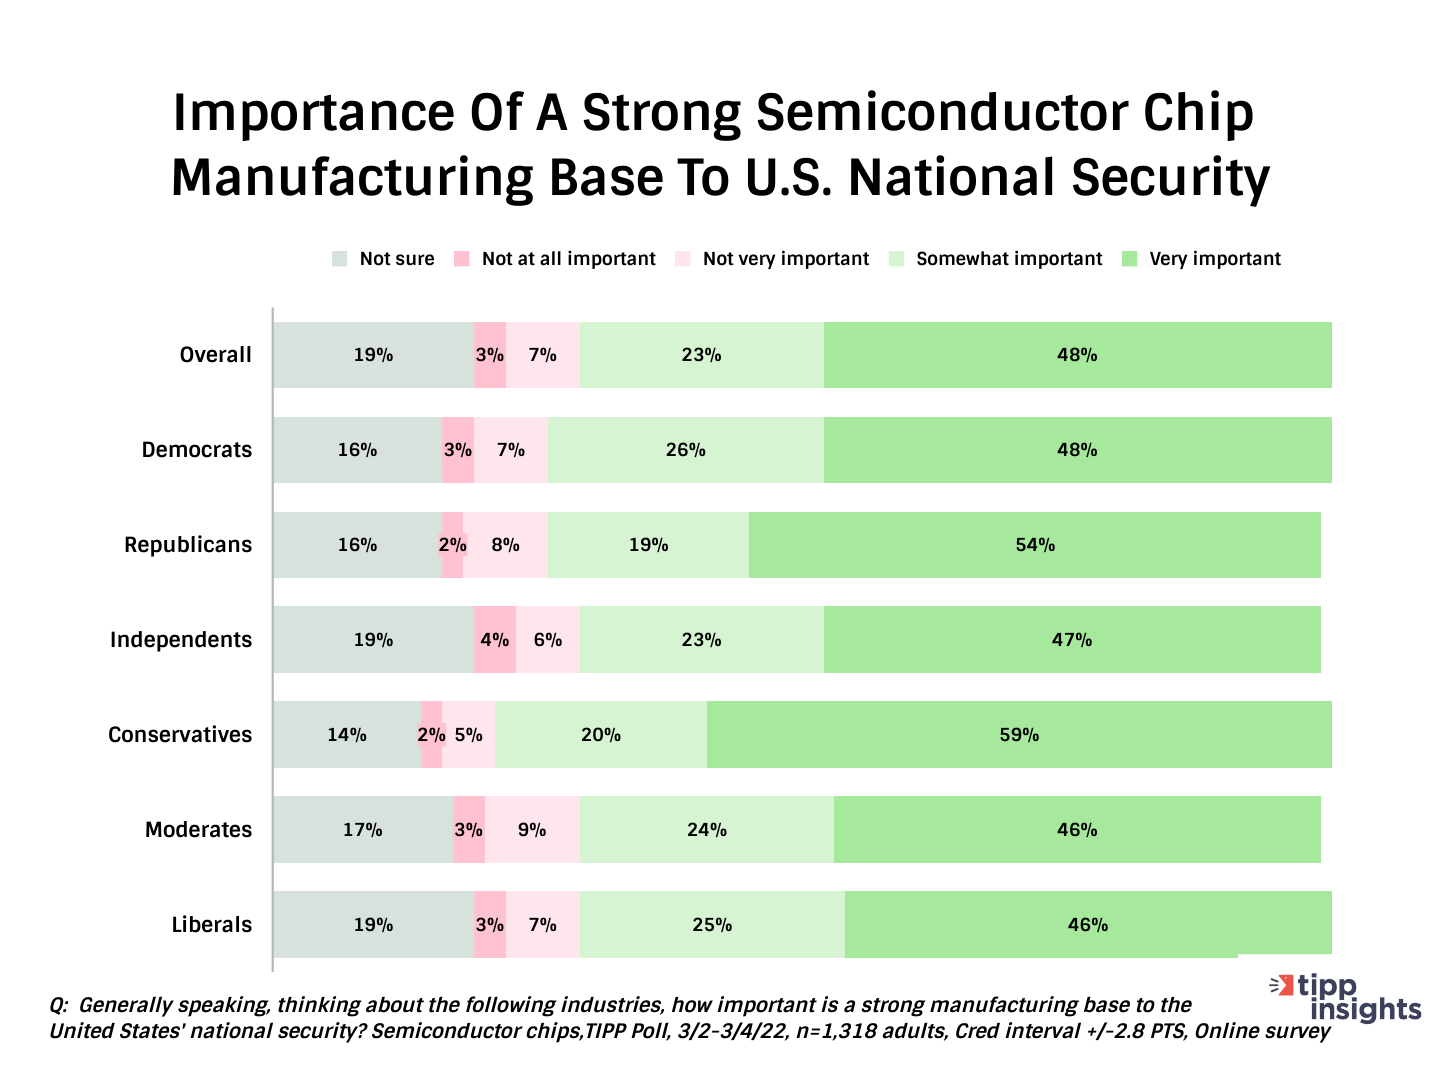 Importance of a strong semiconductor manufacturing base to national security - by party and ideology